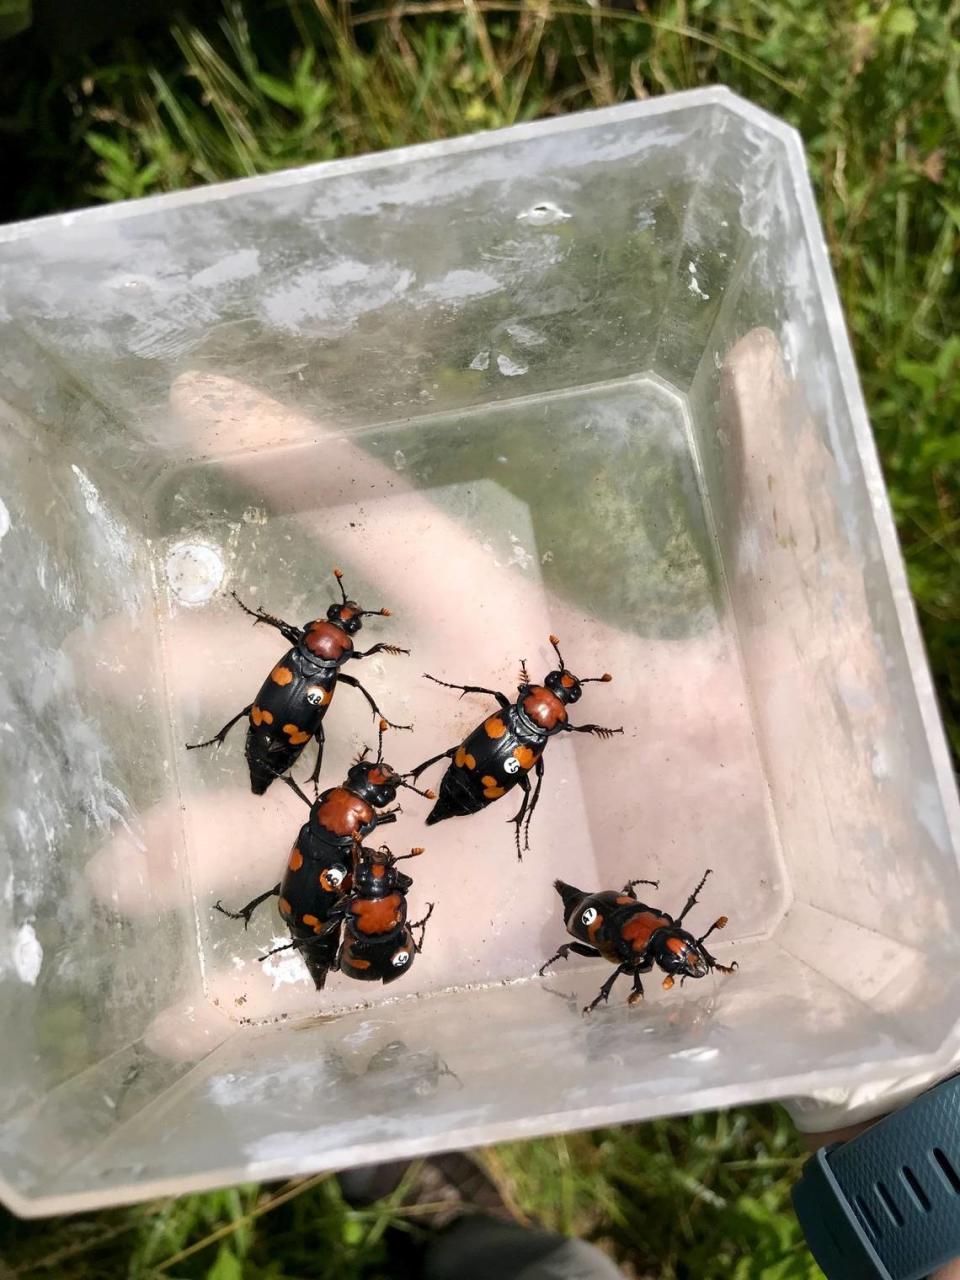 Researchers reintroduce American burying beetles and provide them with a food source in a natural habitat in southwest Missouri.